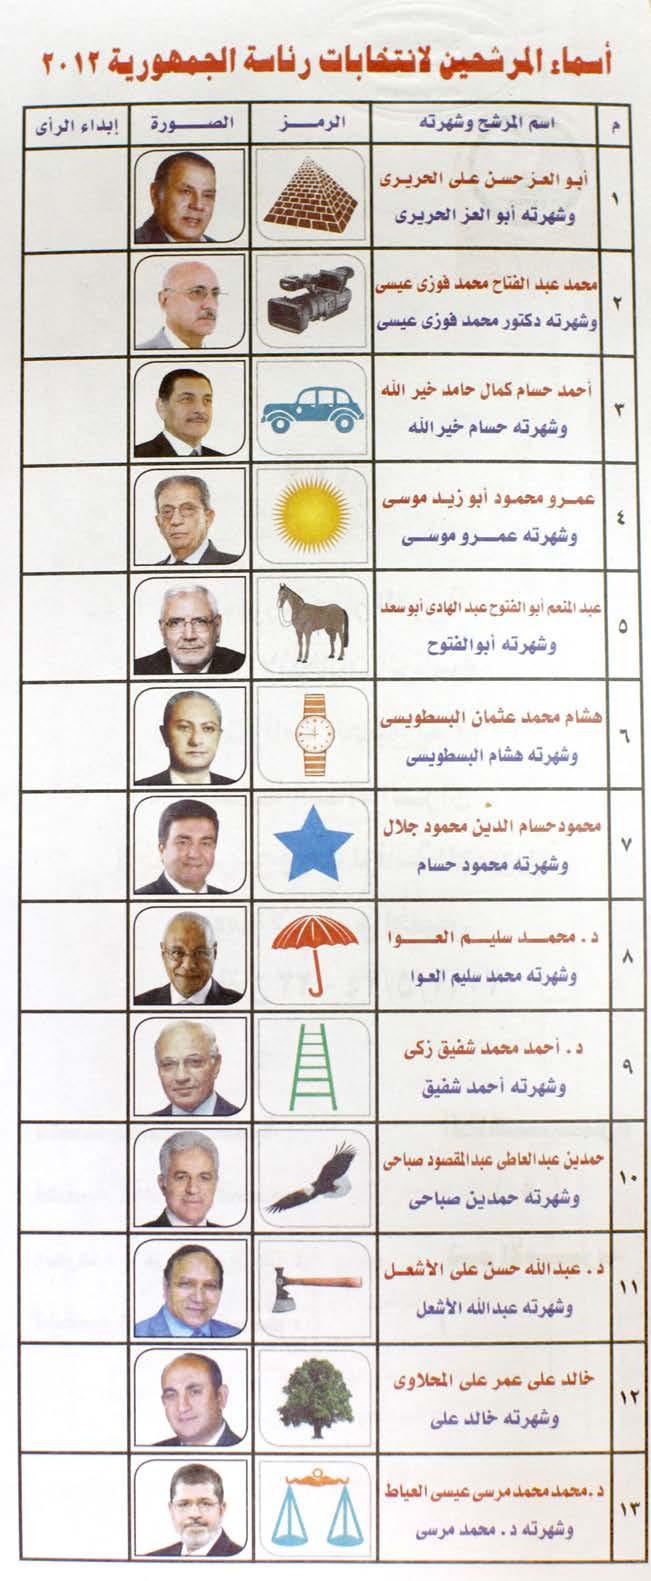 FREDRIK PERSSON / AP / CORBIS Illustrated ballots helped the illiterate in the first round of Egypt s historic presidential election last May.